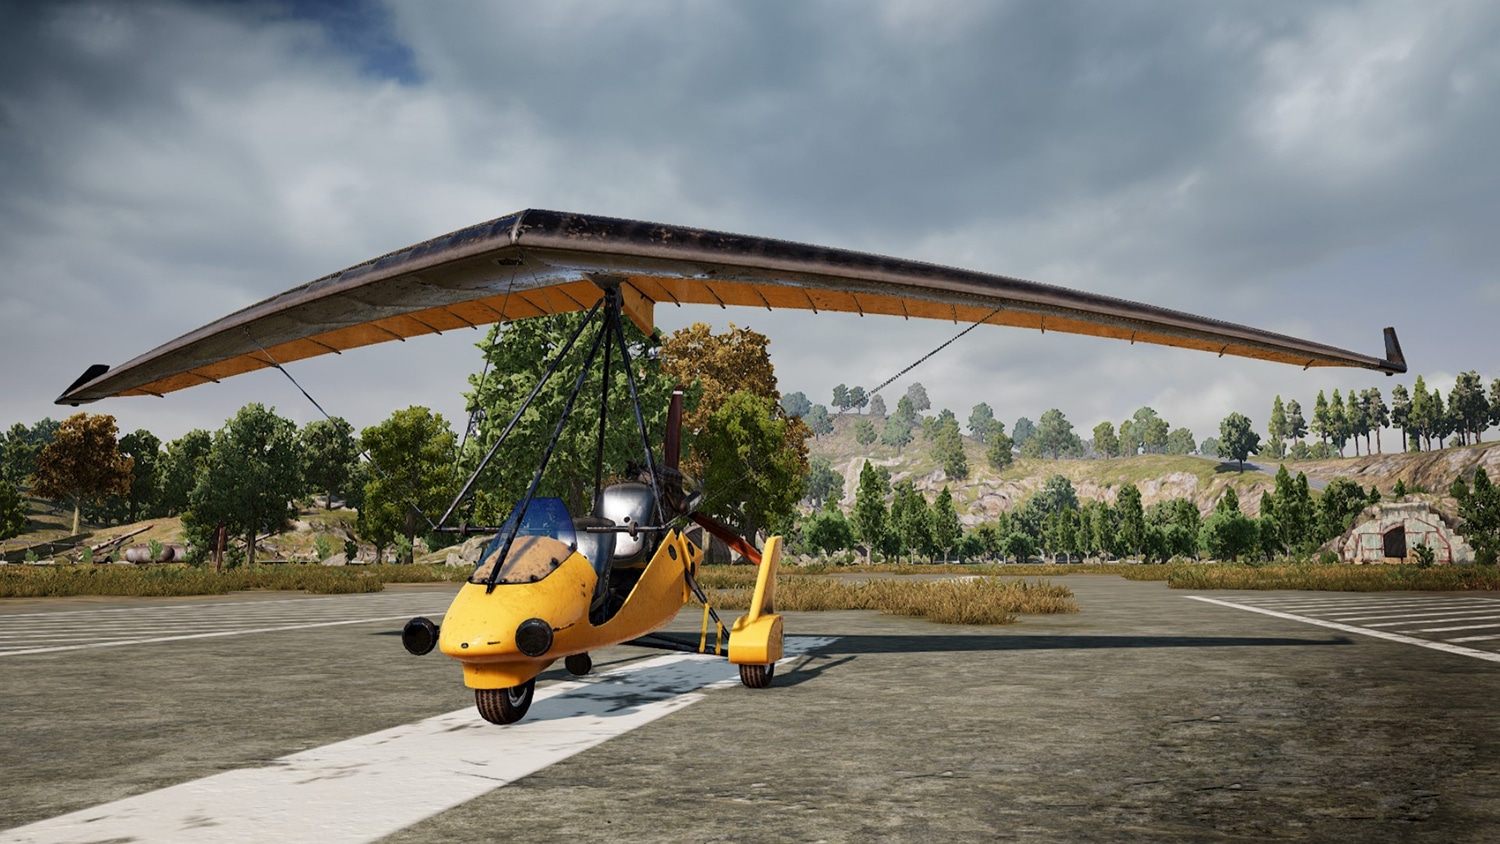 PUBG lets you fly for the first time with its new motorized hang glider